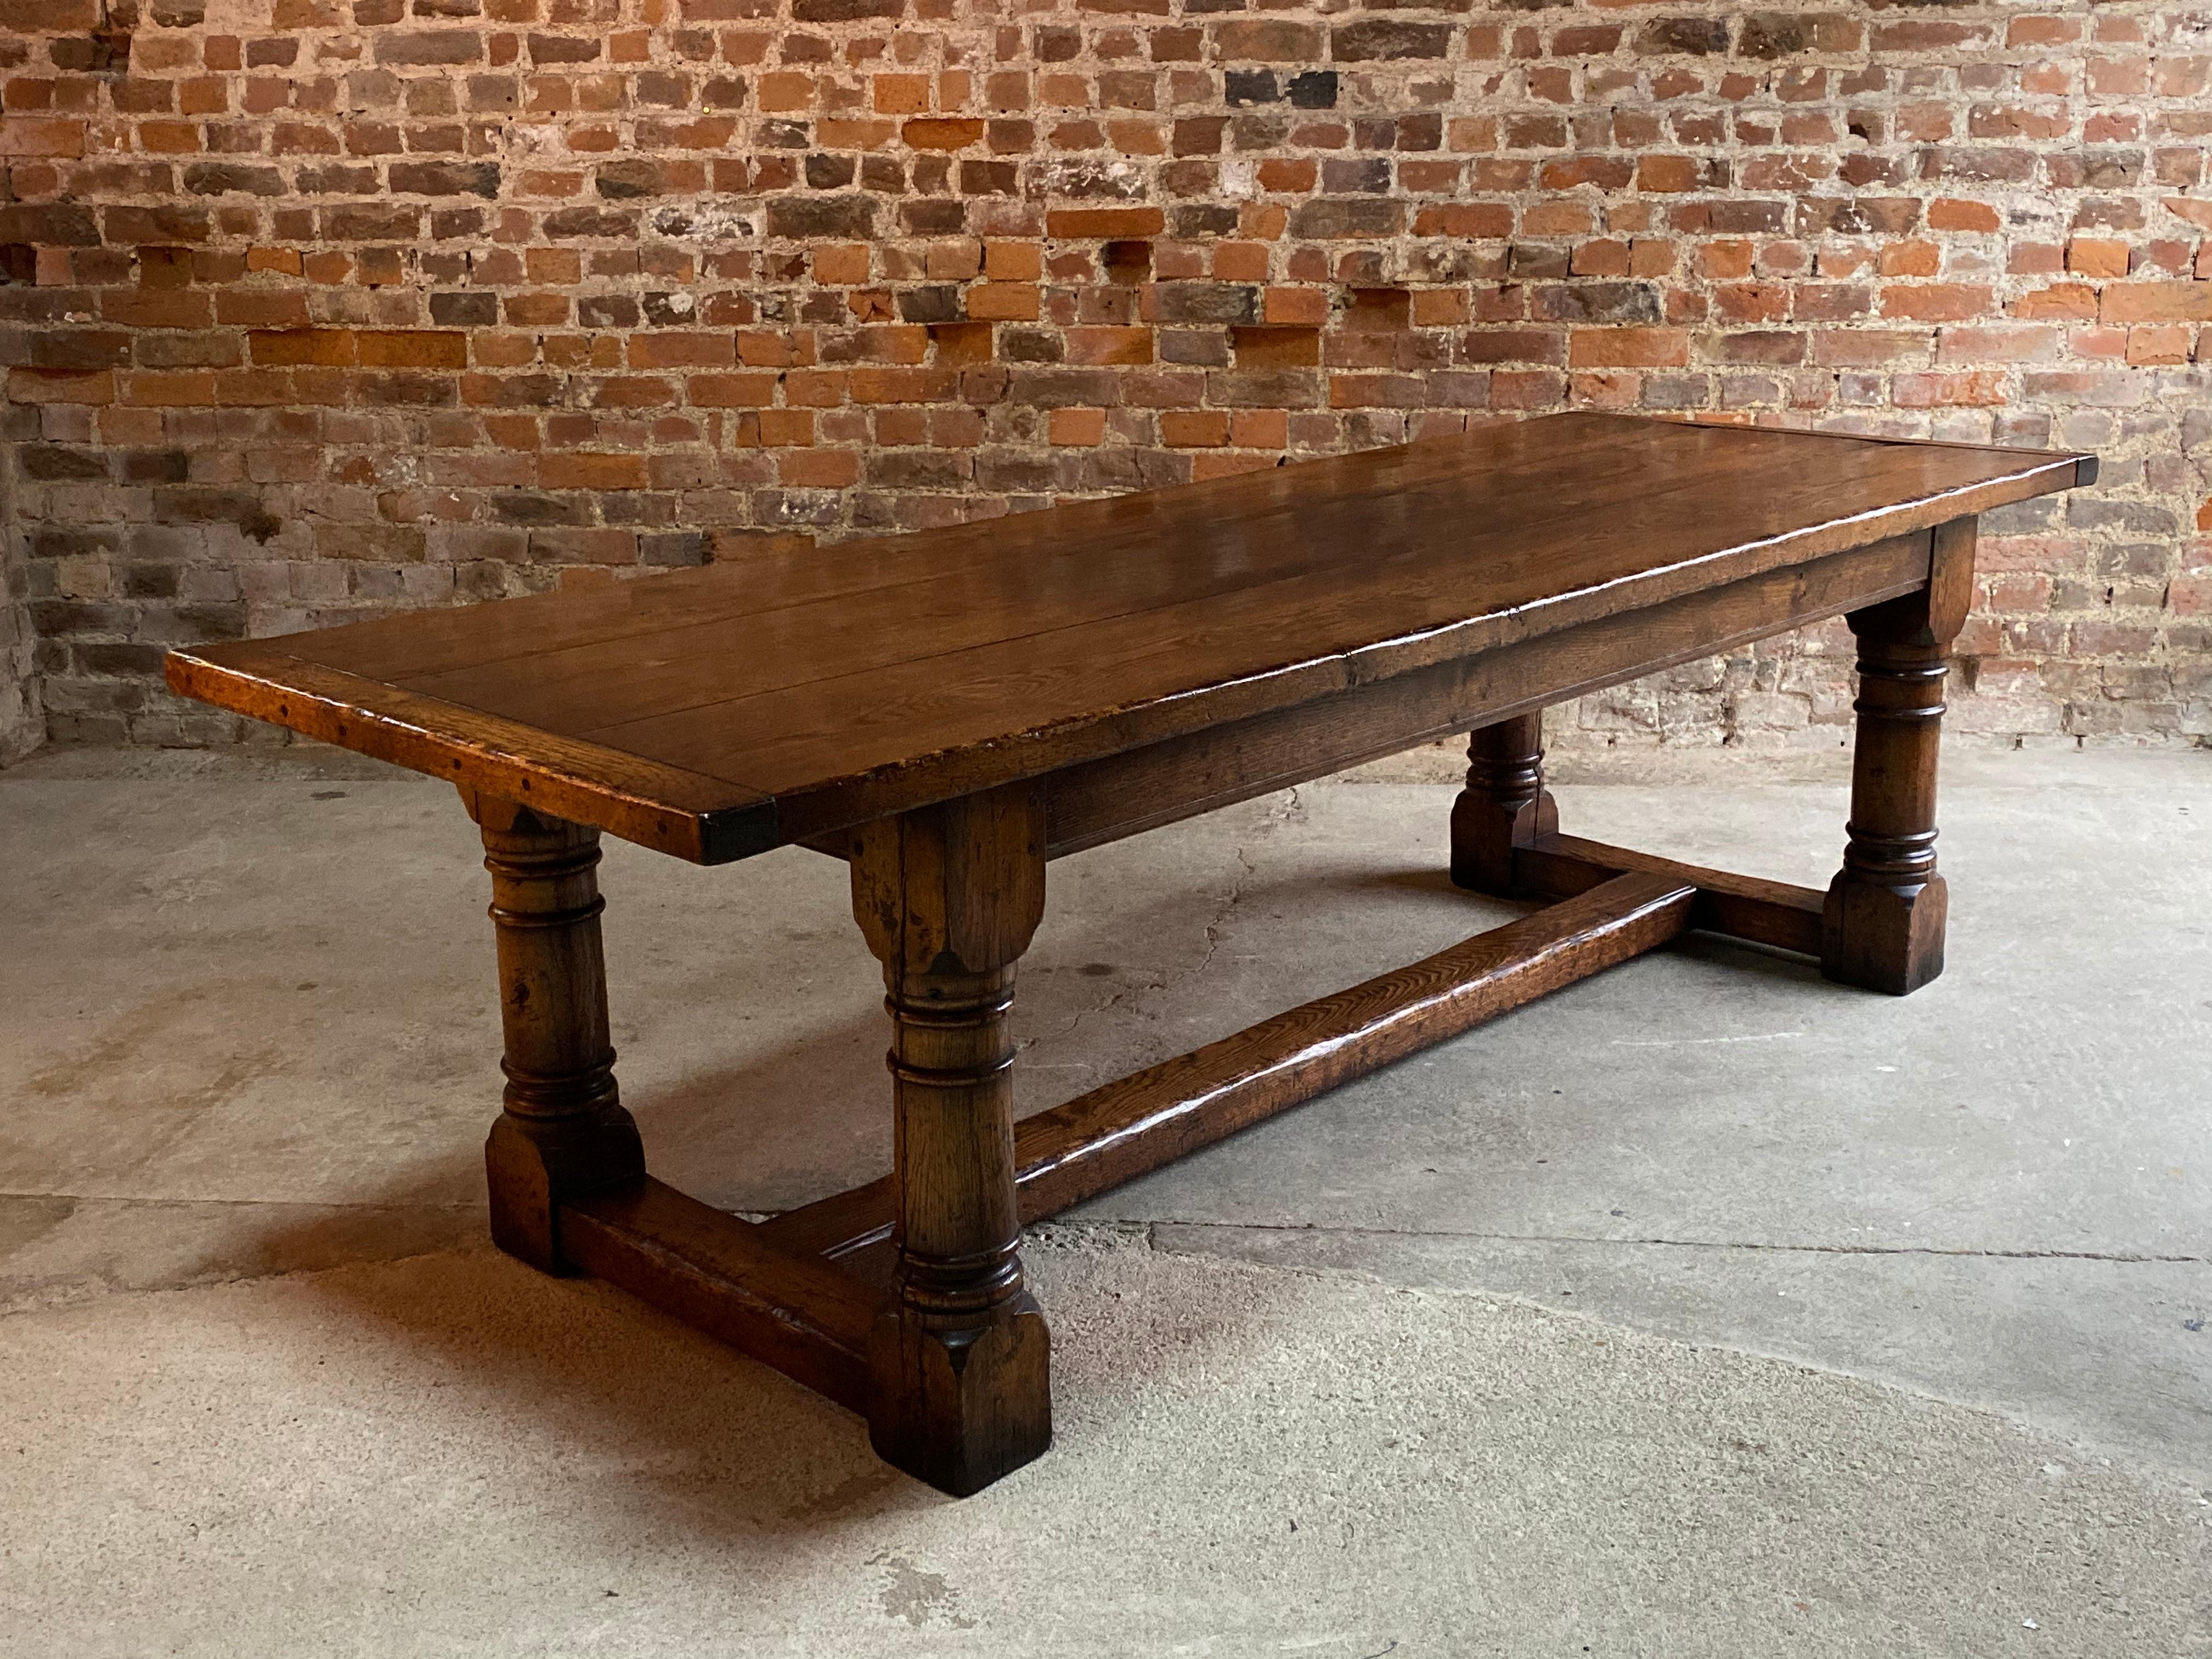 Victorian Antique Oak Refectory Dining Table and Eight Chairs 19th Century, circa 1890